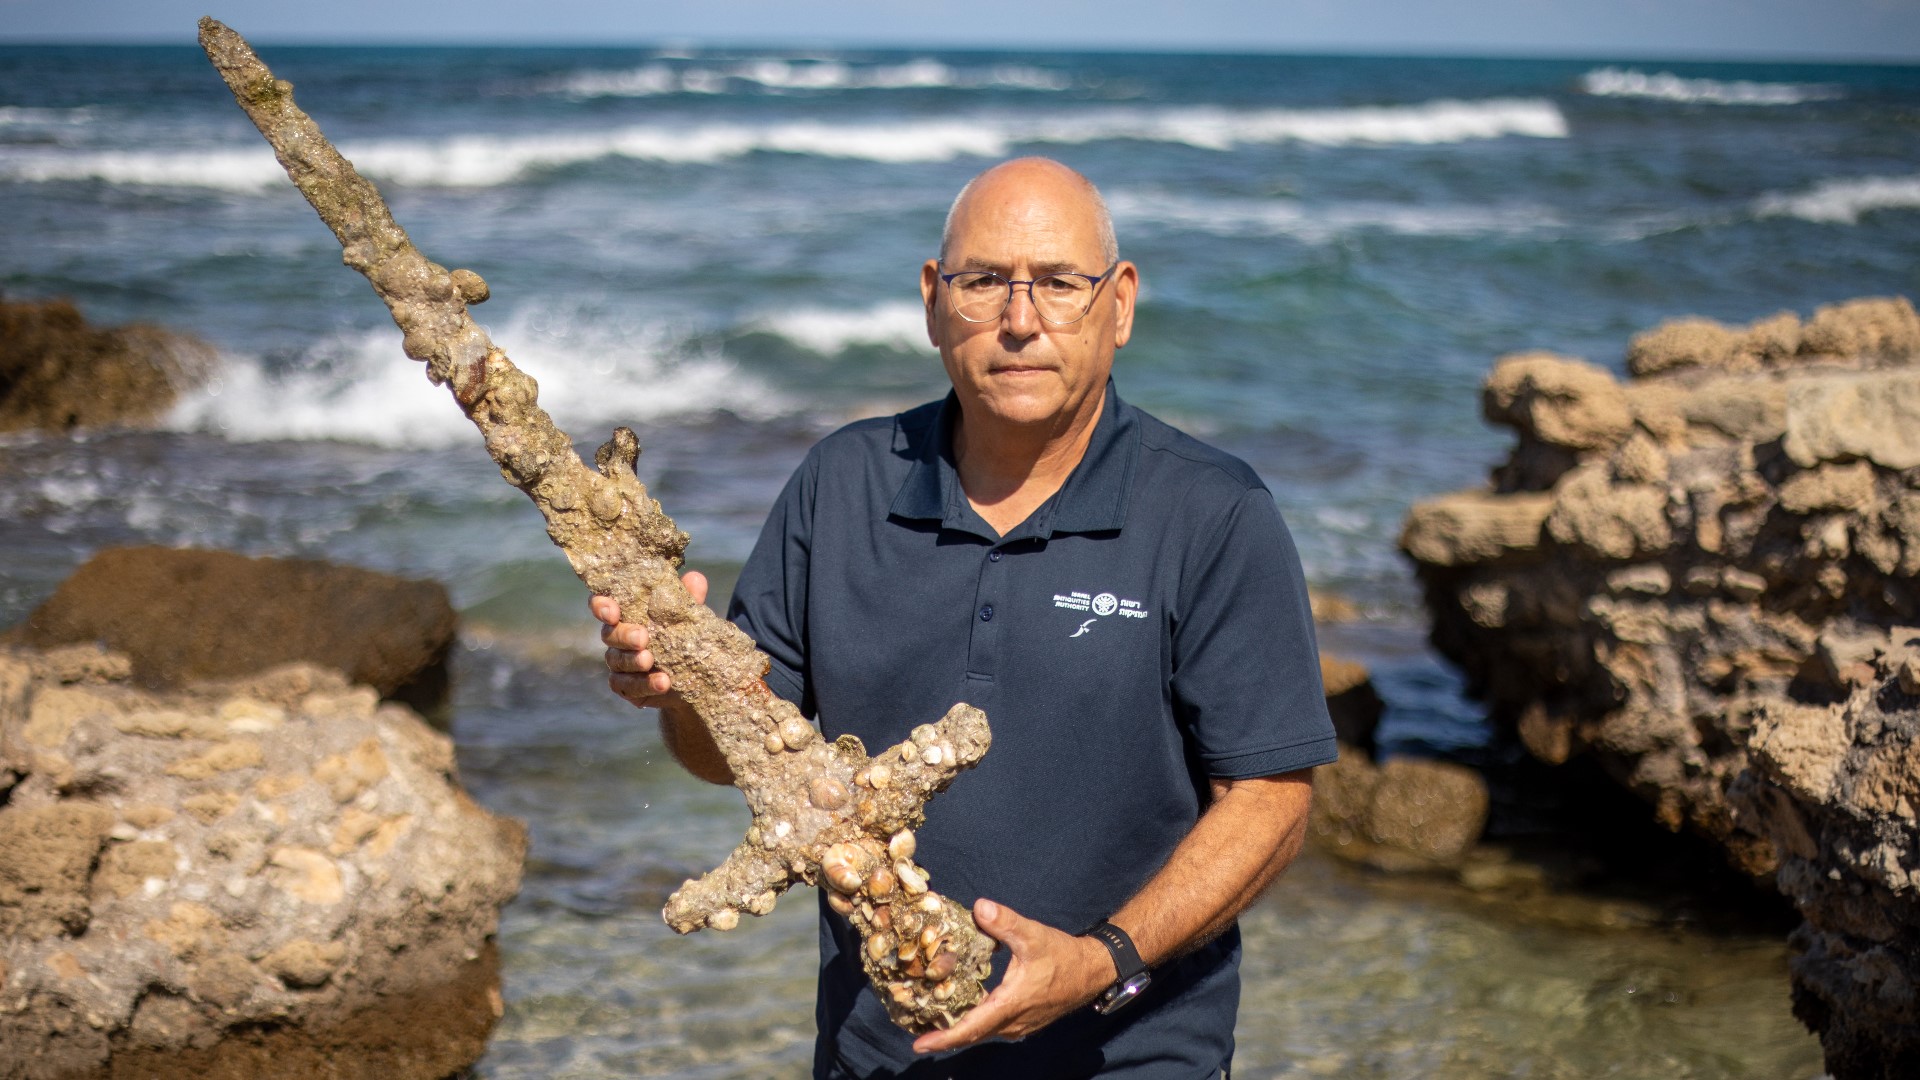 An Israeli scuba diver has salvaged an ancient sword off the country's Mediterranean coast that experts say dates back to the Crusades.